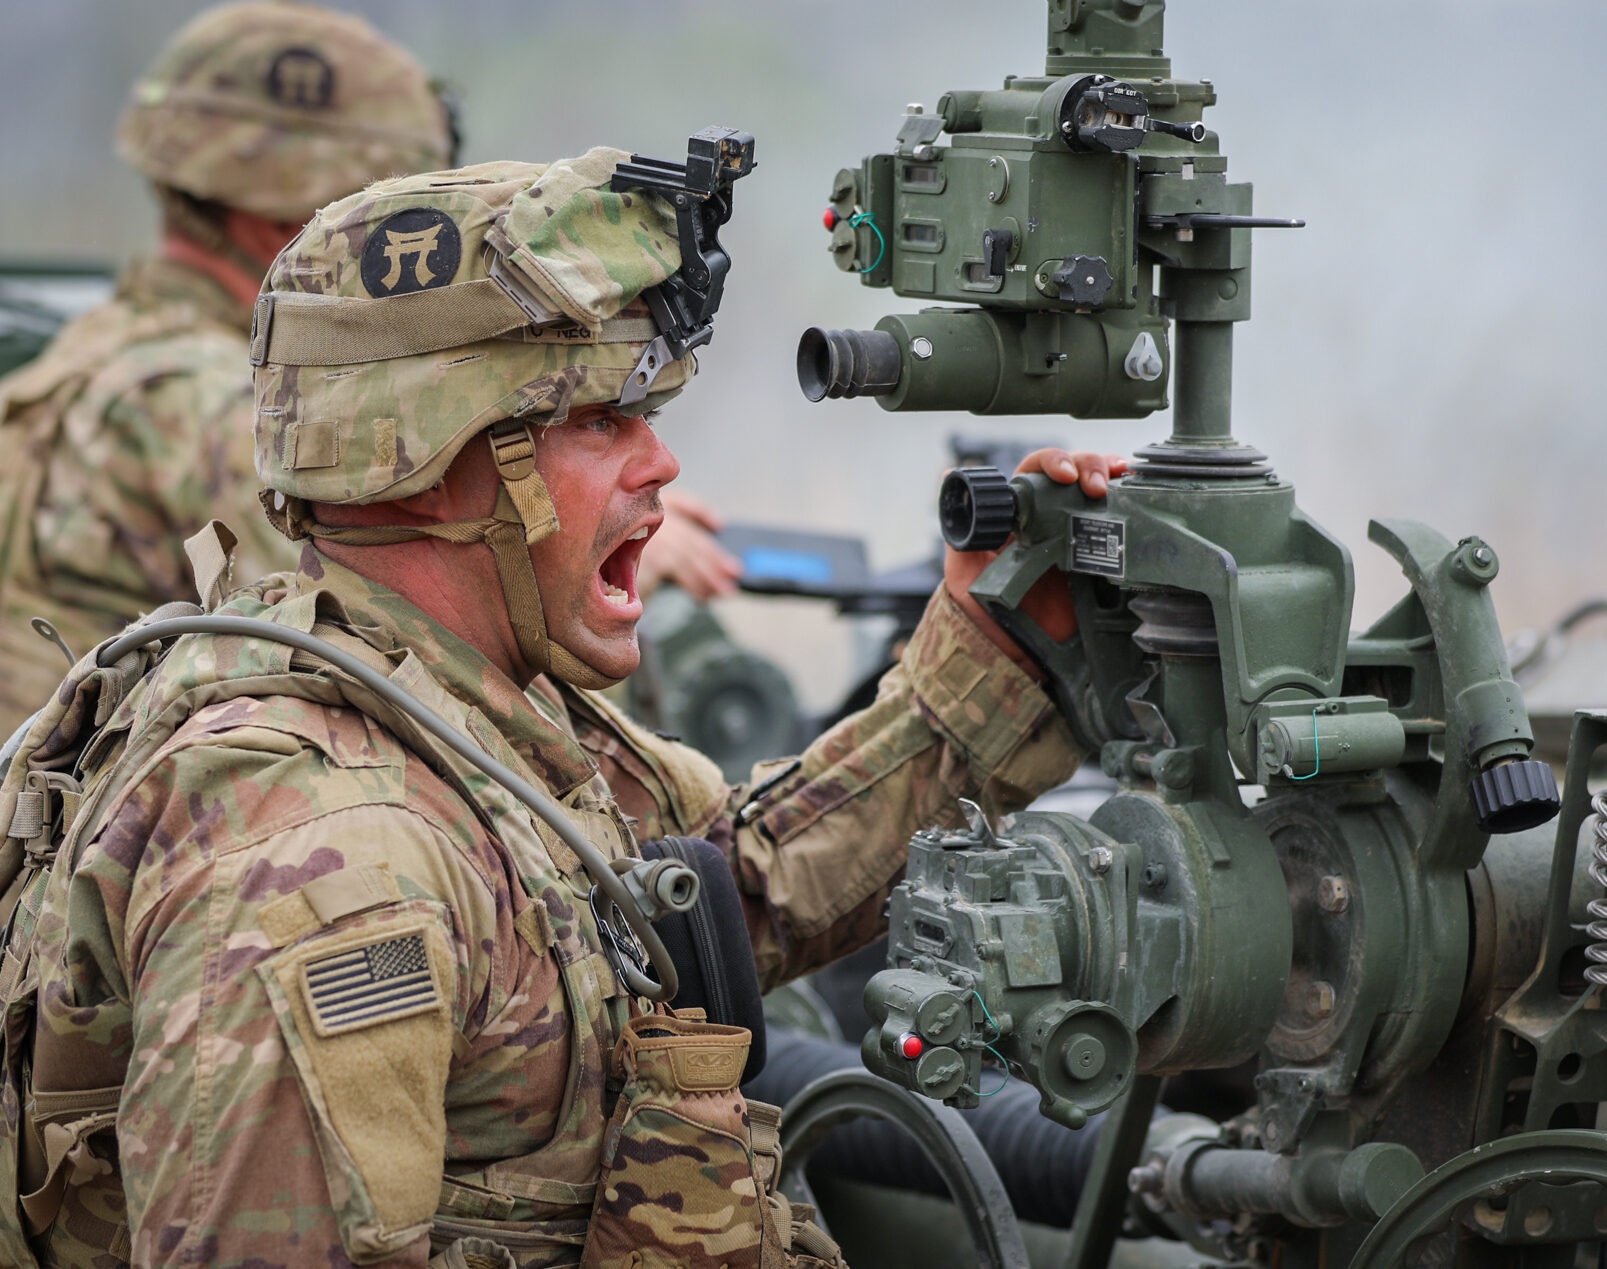 Sgt. Joseph Kammerer, a cannon crewmember with C Battery, 3rd Battalion, 320th Field Artillery Regiment, 3rd Brigade Combat Team, 101st Airborne Division (Air Assault), shouts commands during a direct fire live fire on a range at Fort Knox, KY April 25, 2022.